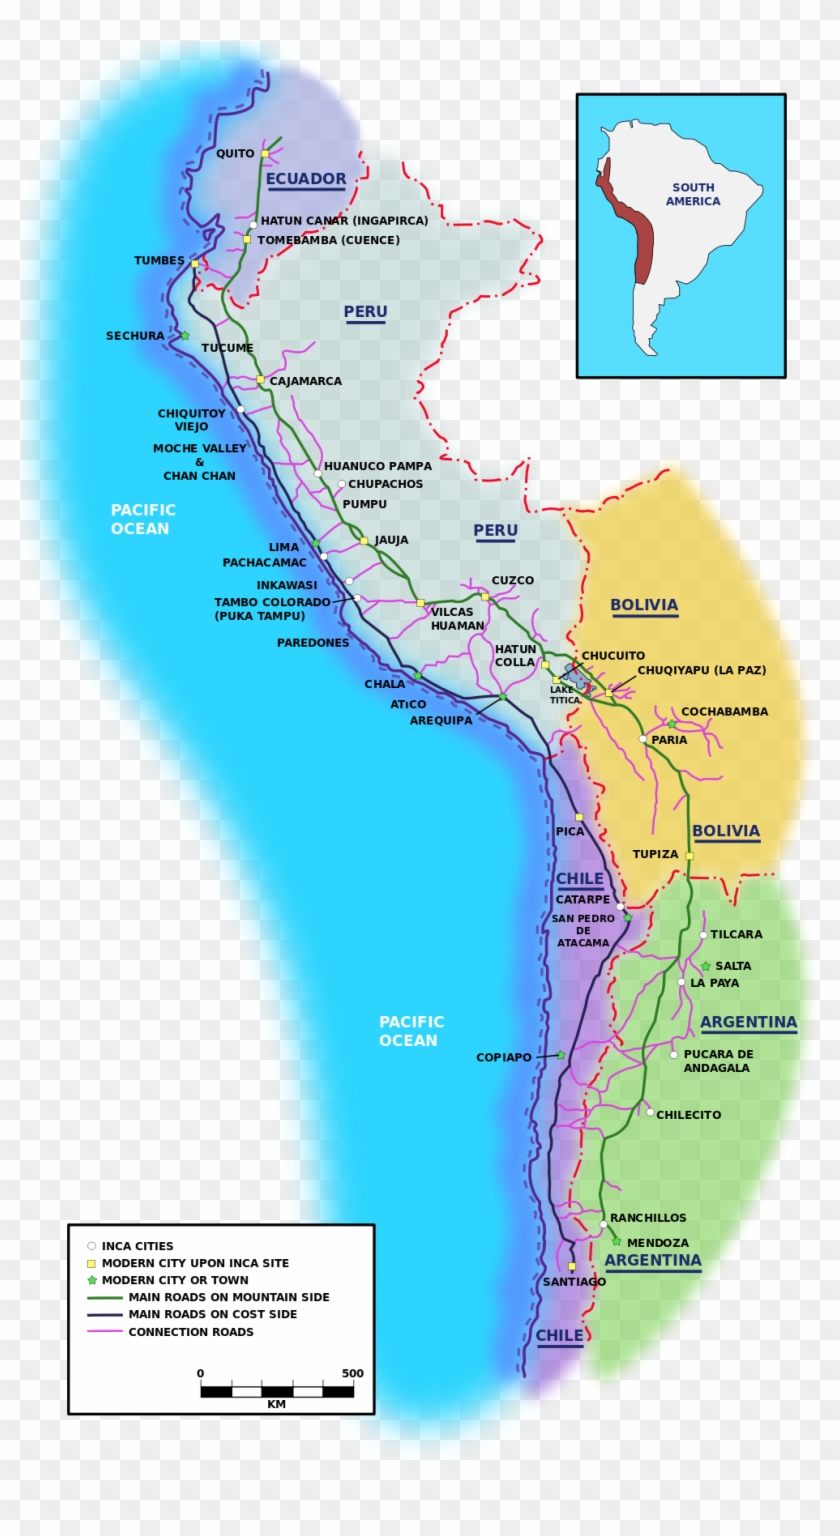 The Inca Road System - Incan Road System Clipart